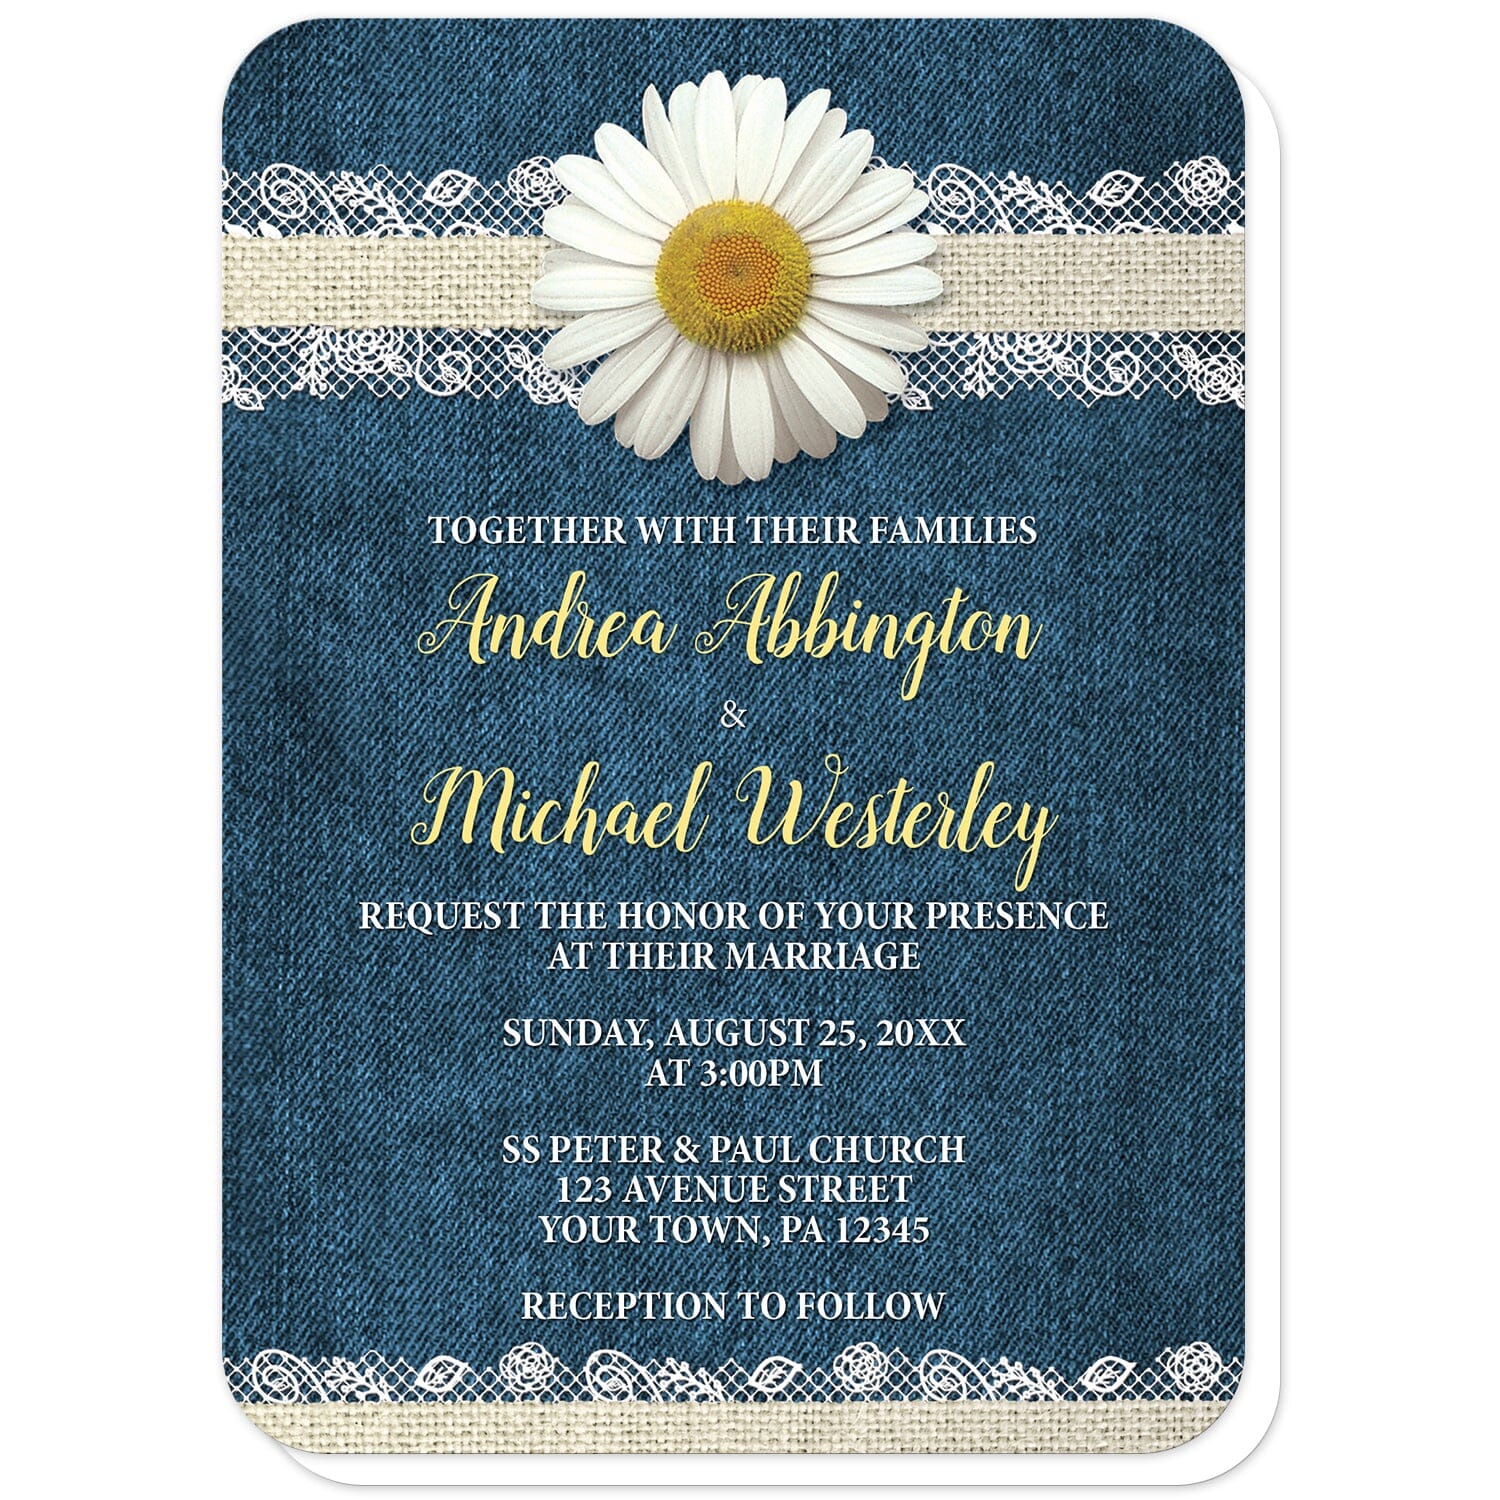 Daisy Burlap and Lace Denim Wedding Invitations (with rounded corners) at Artistically Invited. Southern rustic daisy burlap and lace denim wedding invitations with a white daisy flower centered at the top on a burlap and lace ribbon strip illustration, over a blue country denim fabric background. Your personalized marriage celebration details are custom printed in yellow and white over the denim design. 